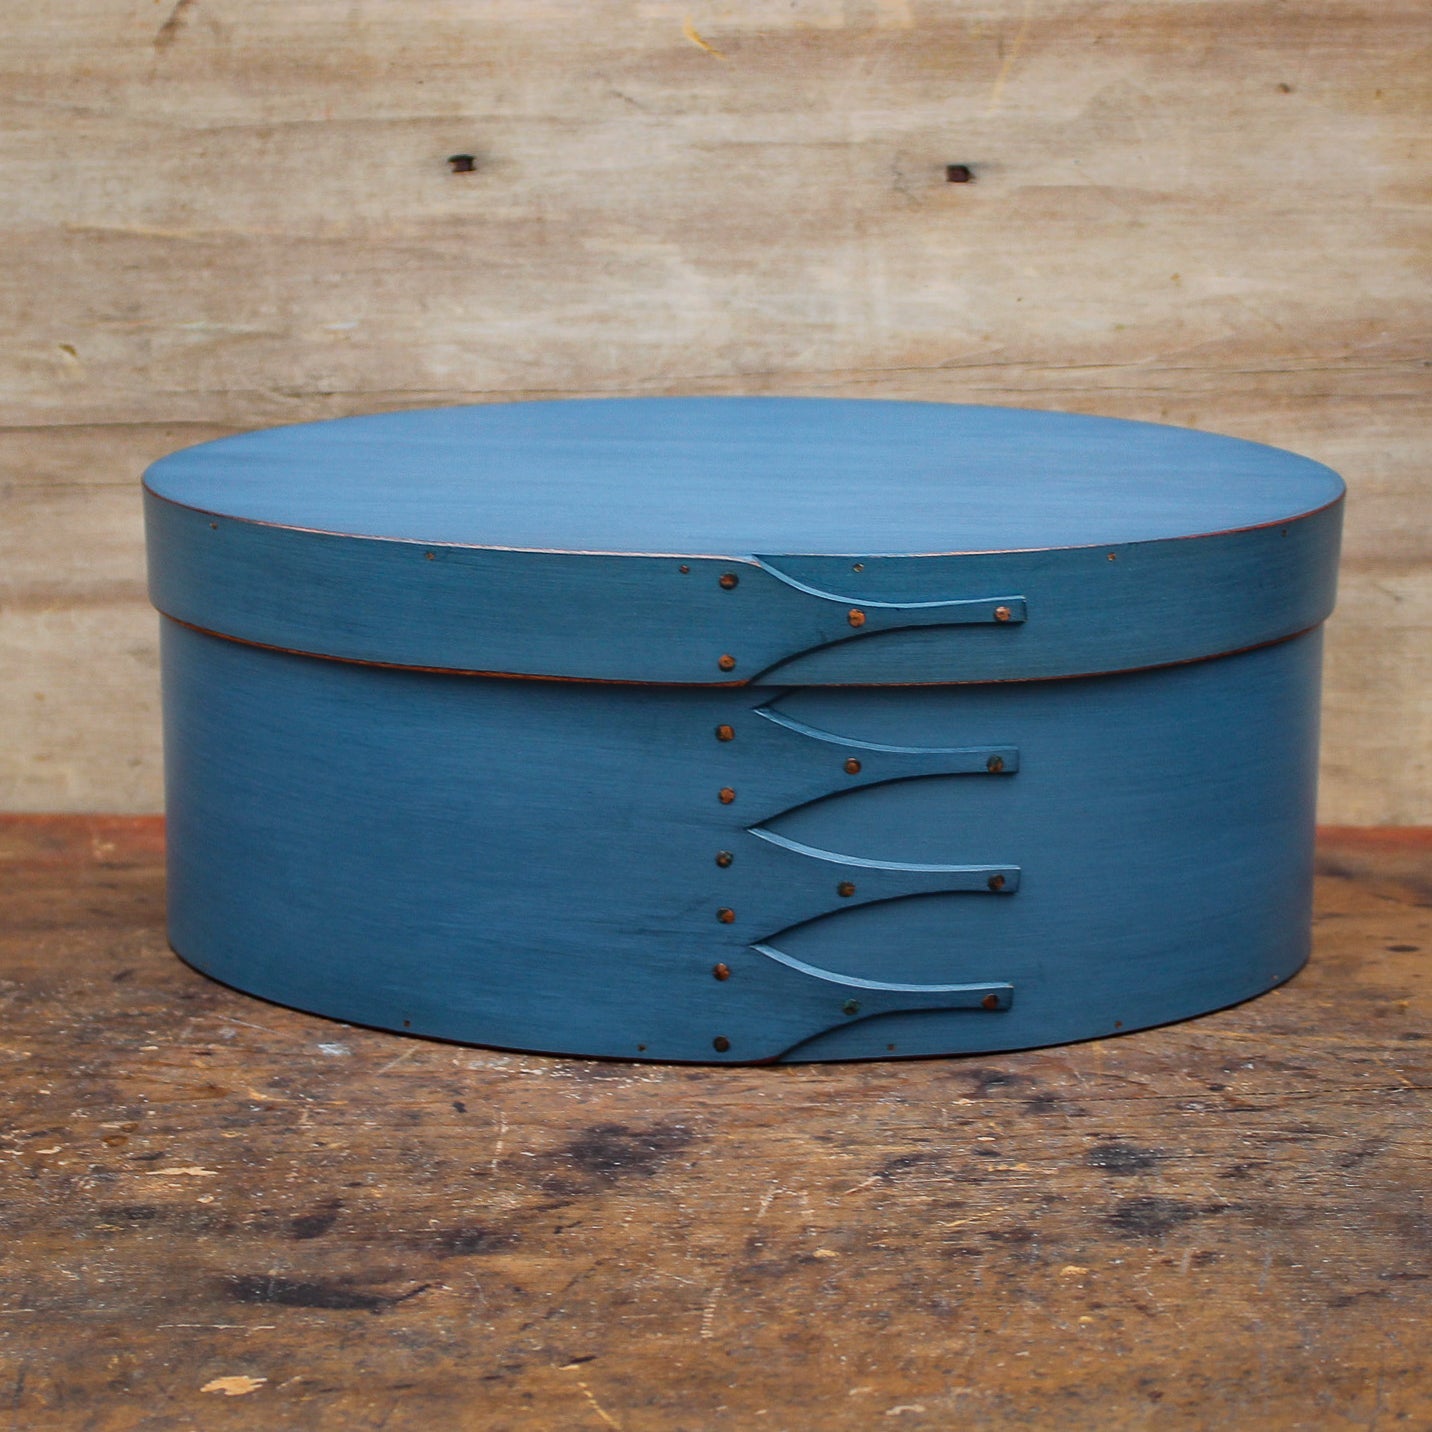 Shaker Oval Box, Size #6, LeHays Shaker Boxes, Handcrafted in Maine. Blue Milk Paint Finish, Front View